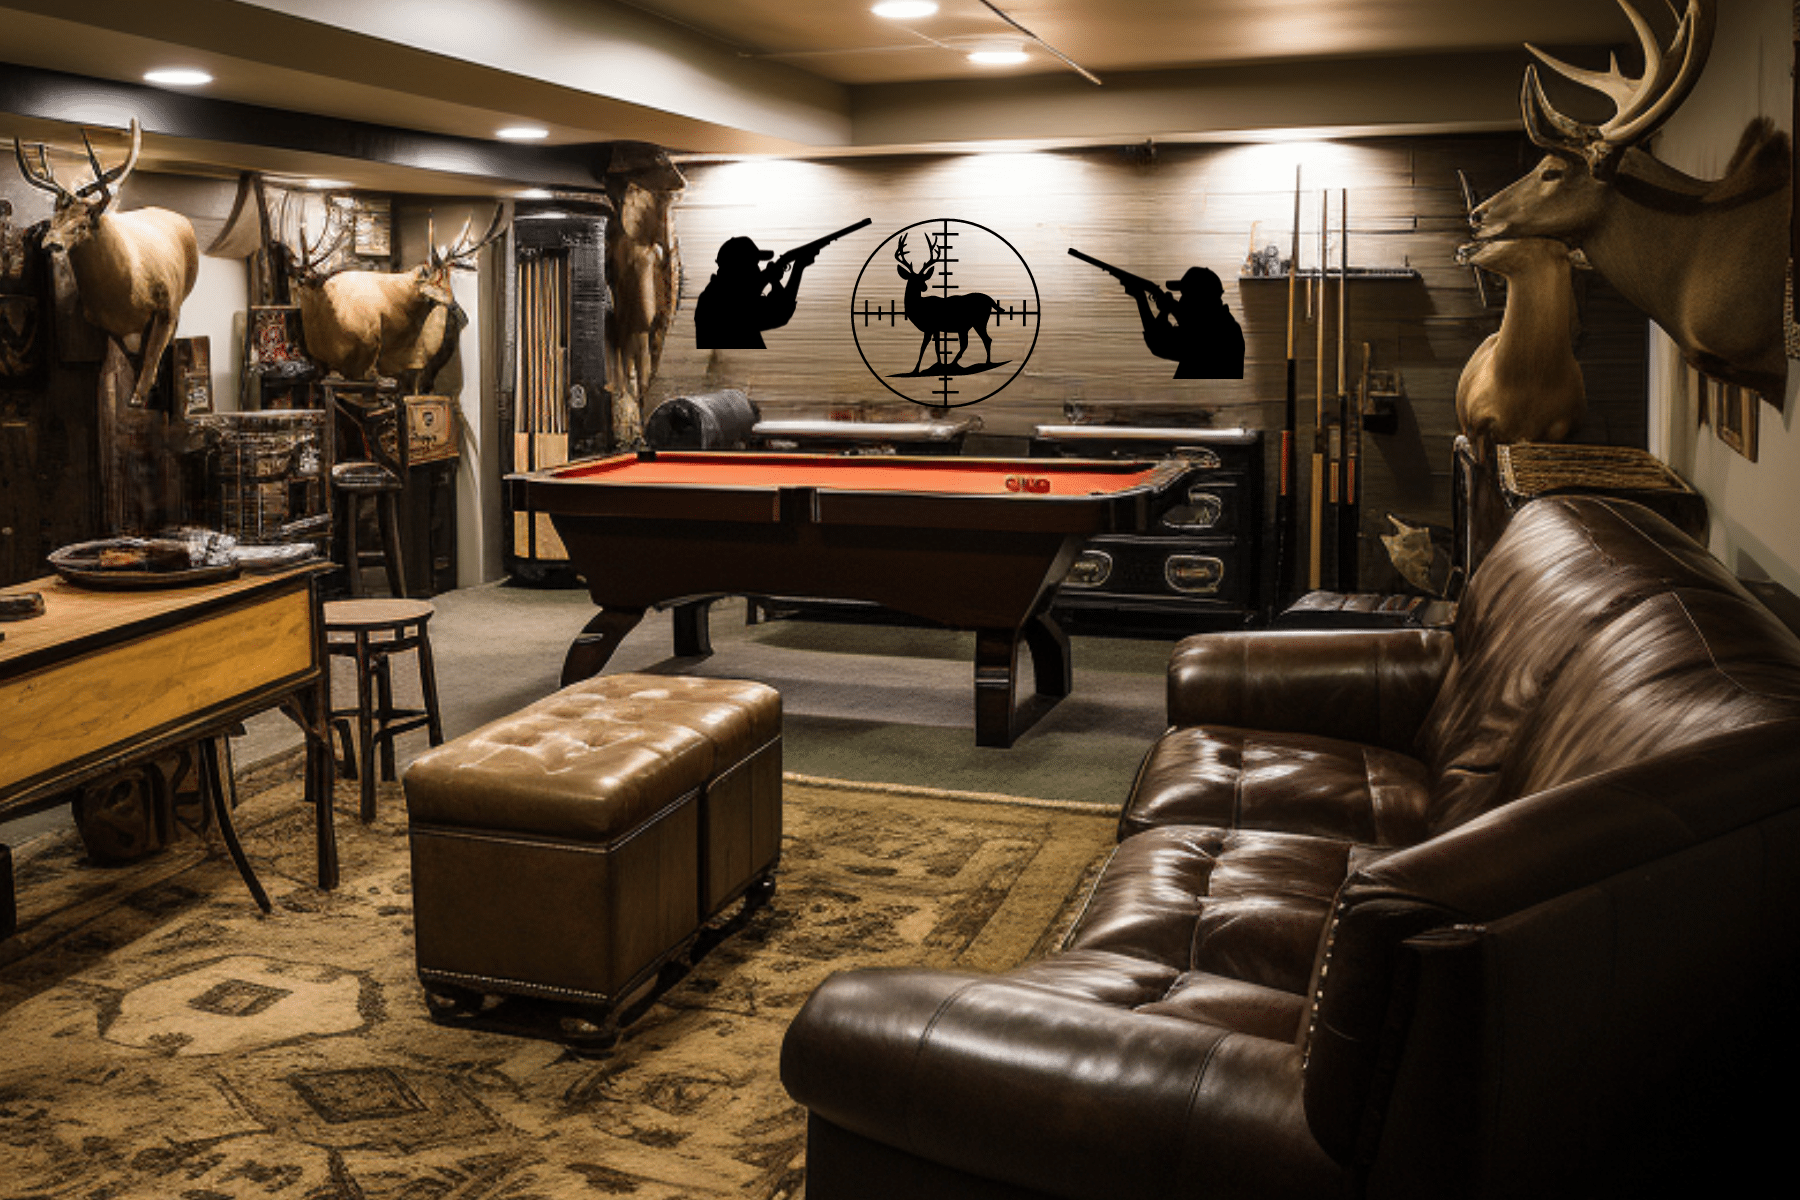 Hunting Man Cave Decor Ideas wall decals